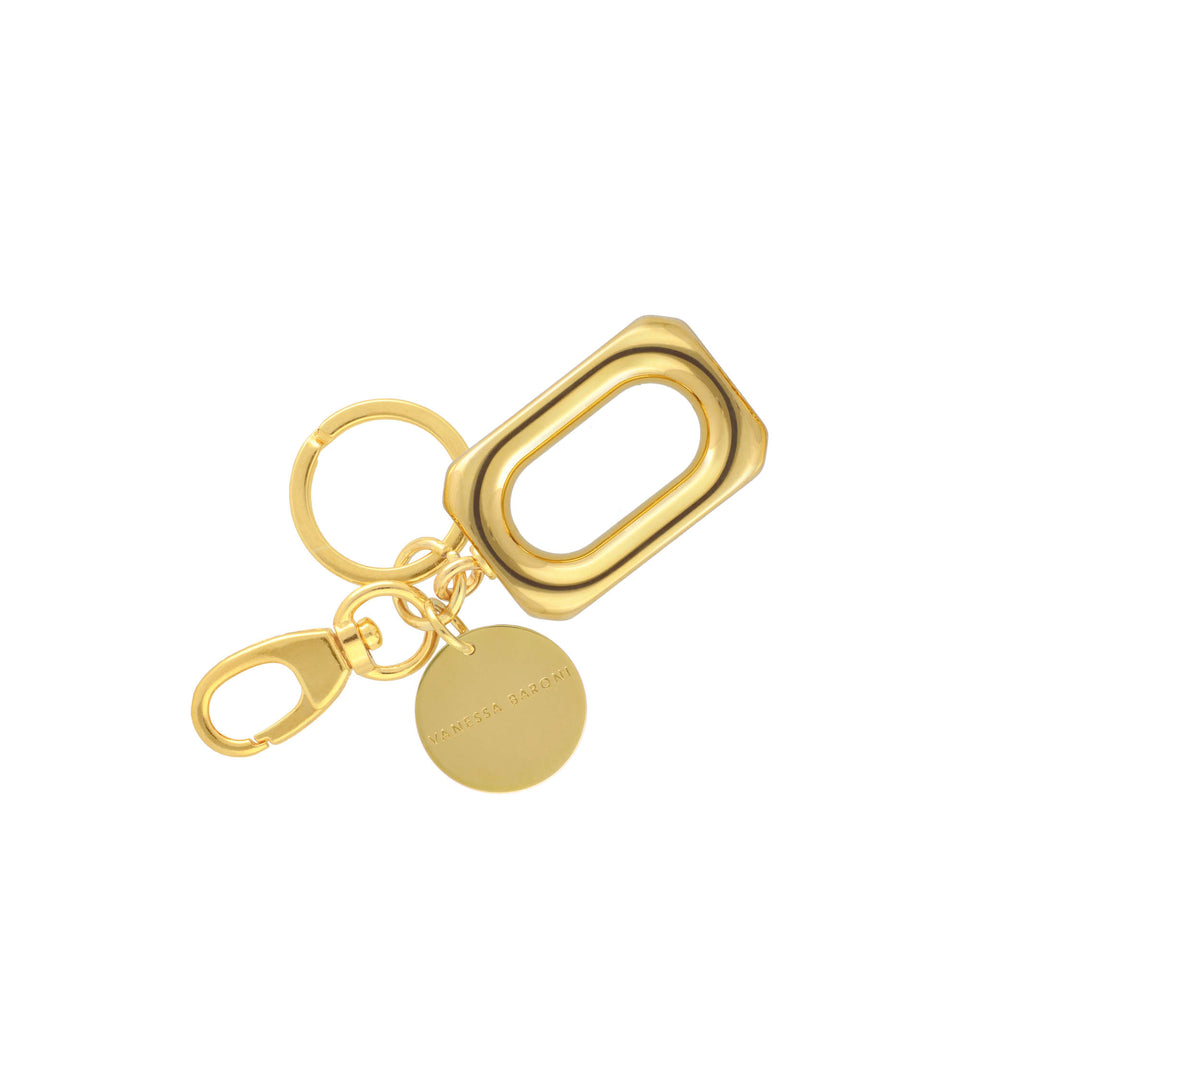 One Square Key Ring gold